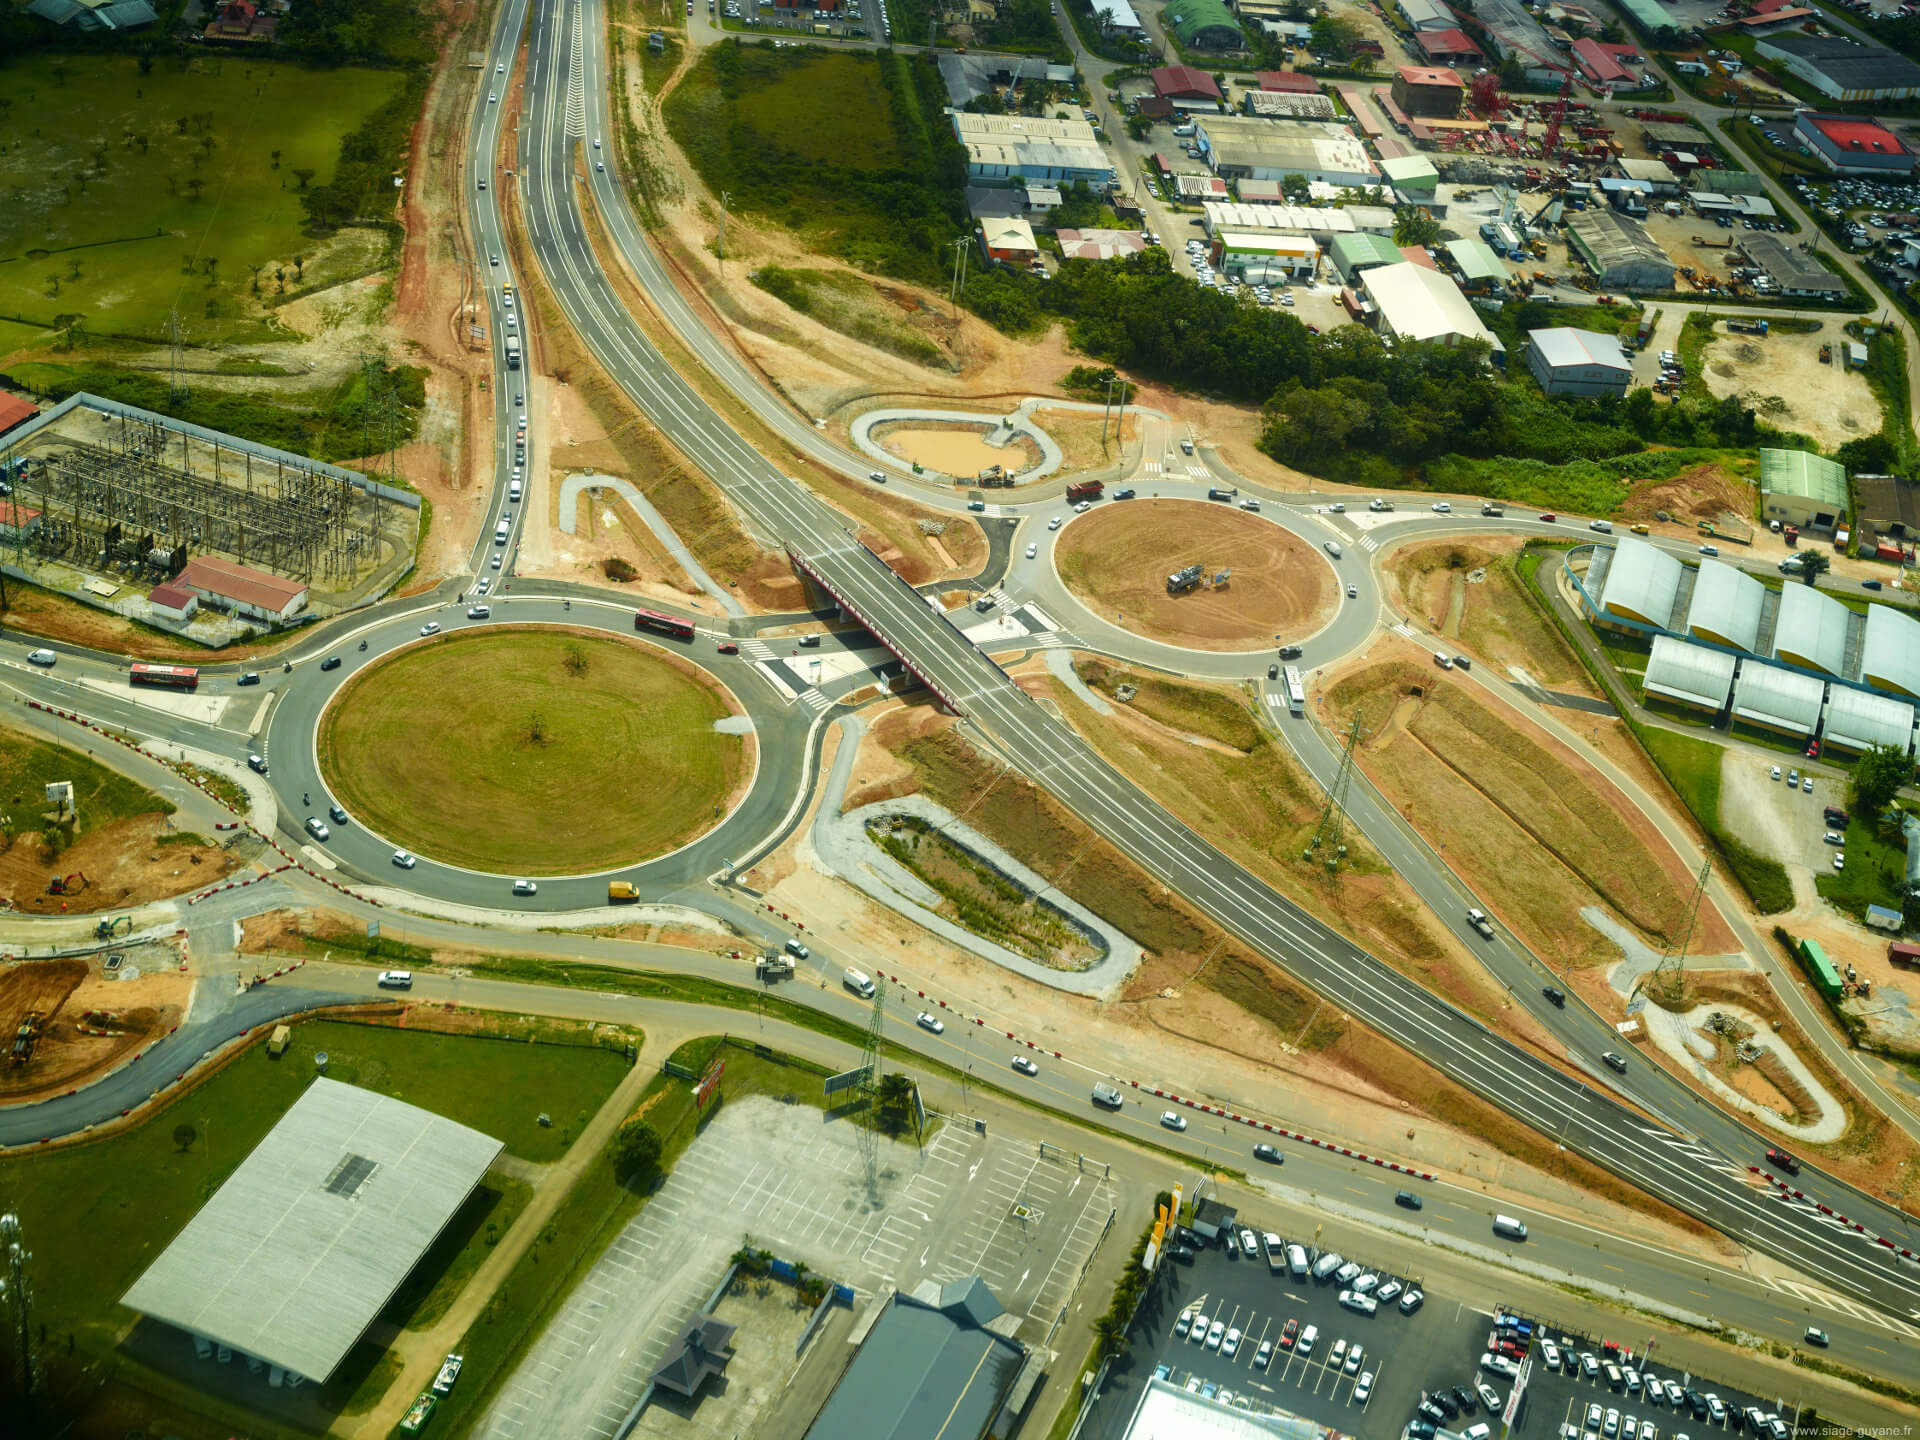 Roundabout in French Guiana